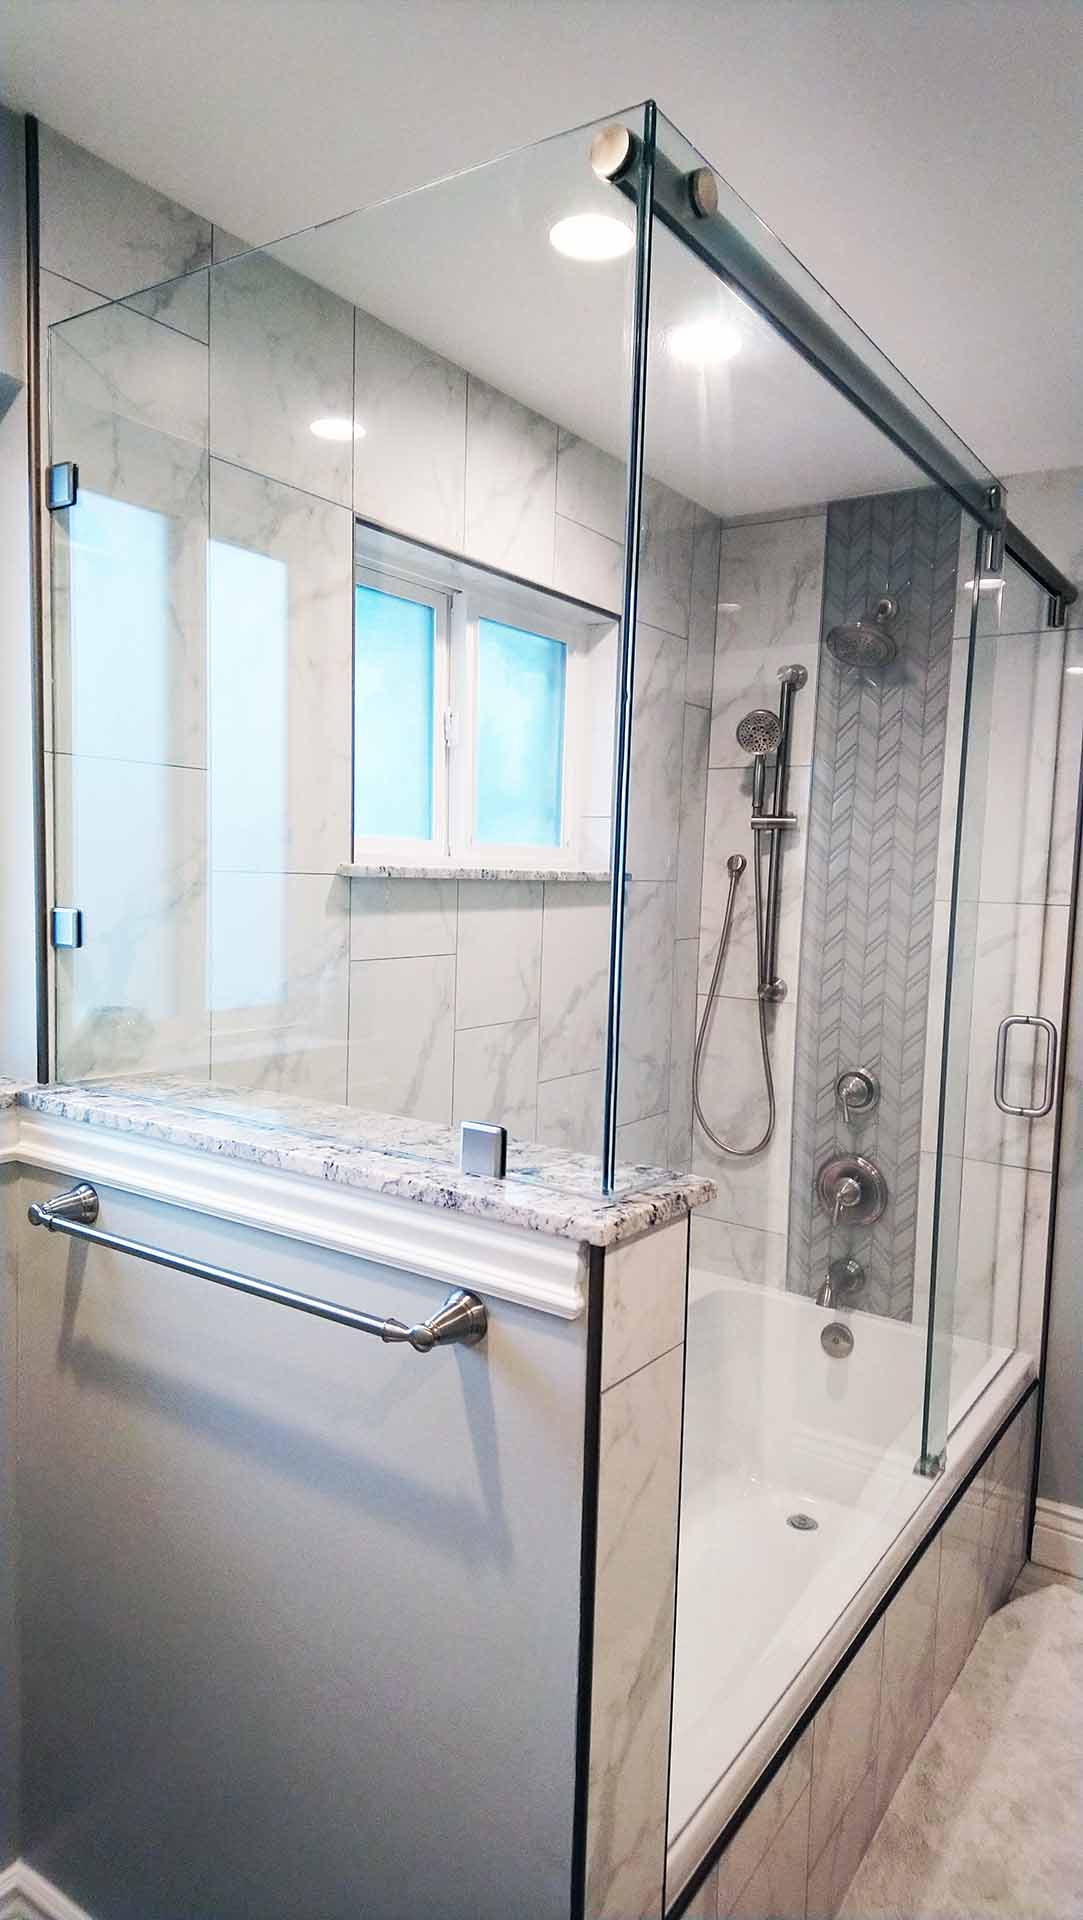 Shower-bathtube enclosed with frameless glass with sliding doors.